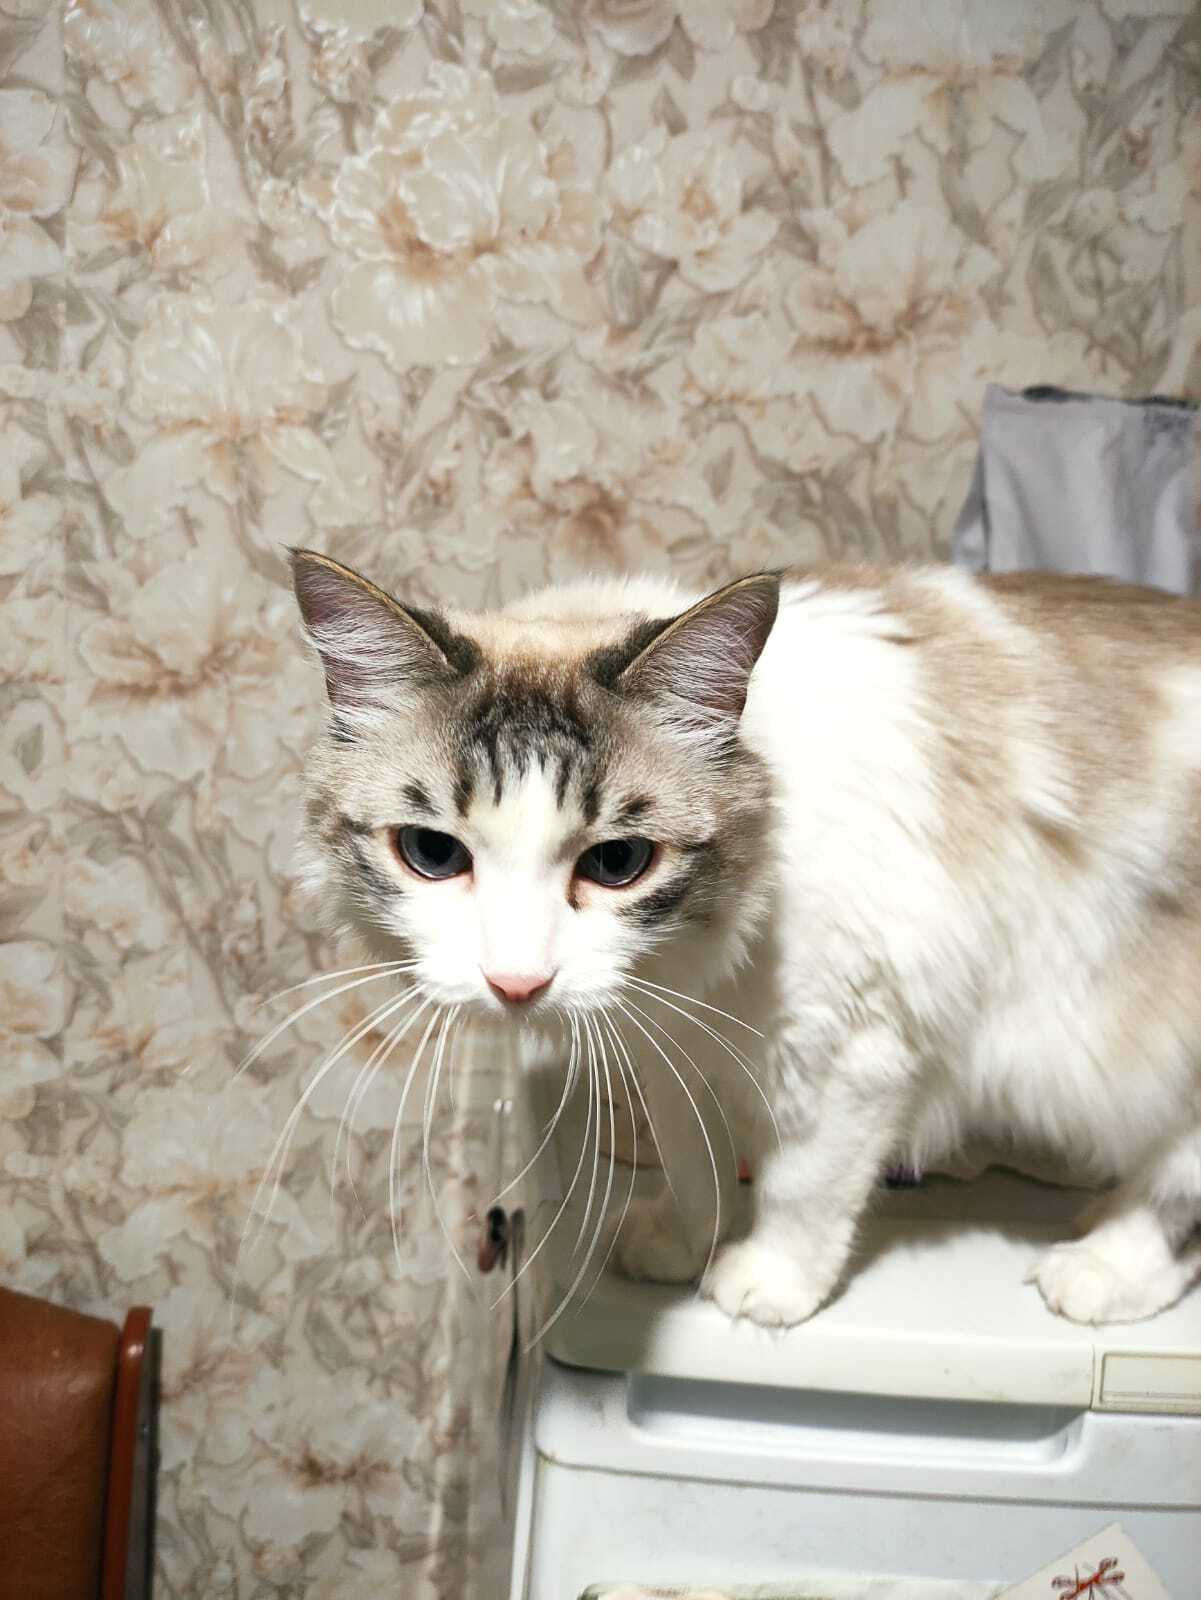 Lost beloved cat! - My, The missing, Lost cat, No rating, Help me find, Moscow, Feely, cat, Tricolor cat, Lost, Longpost